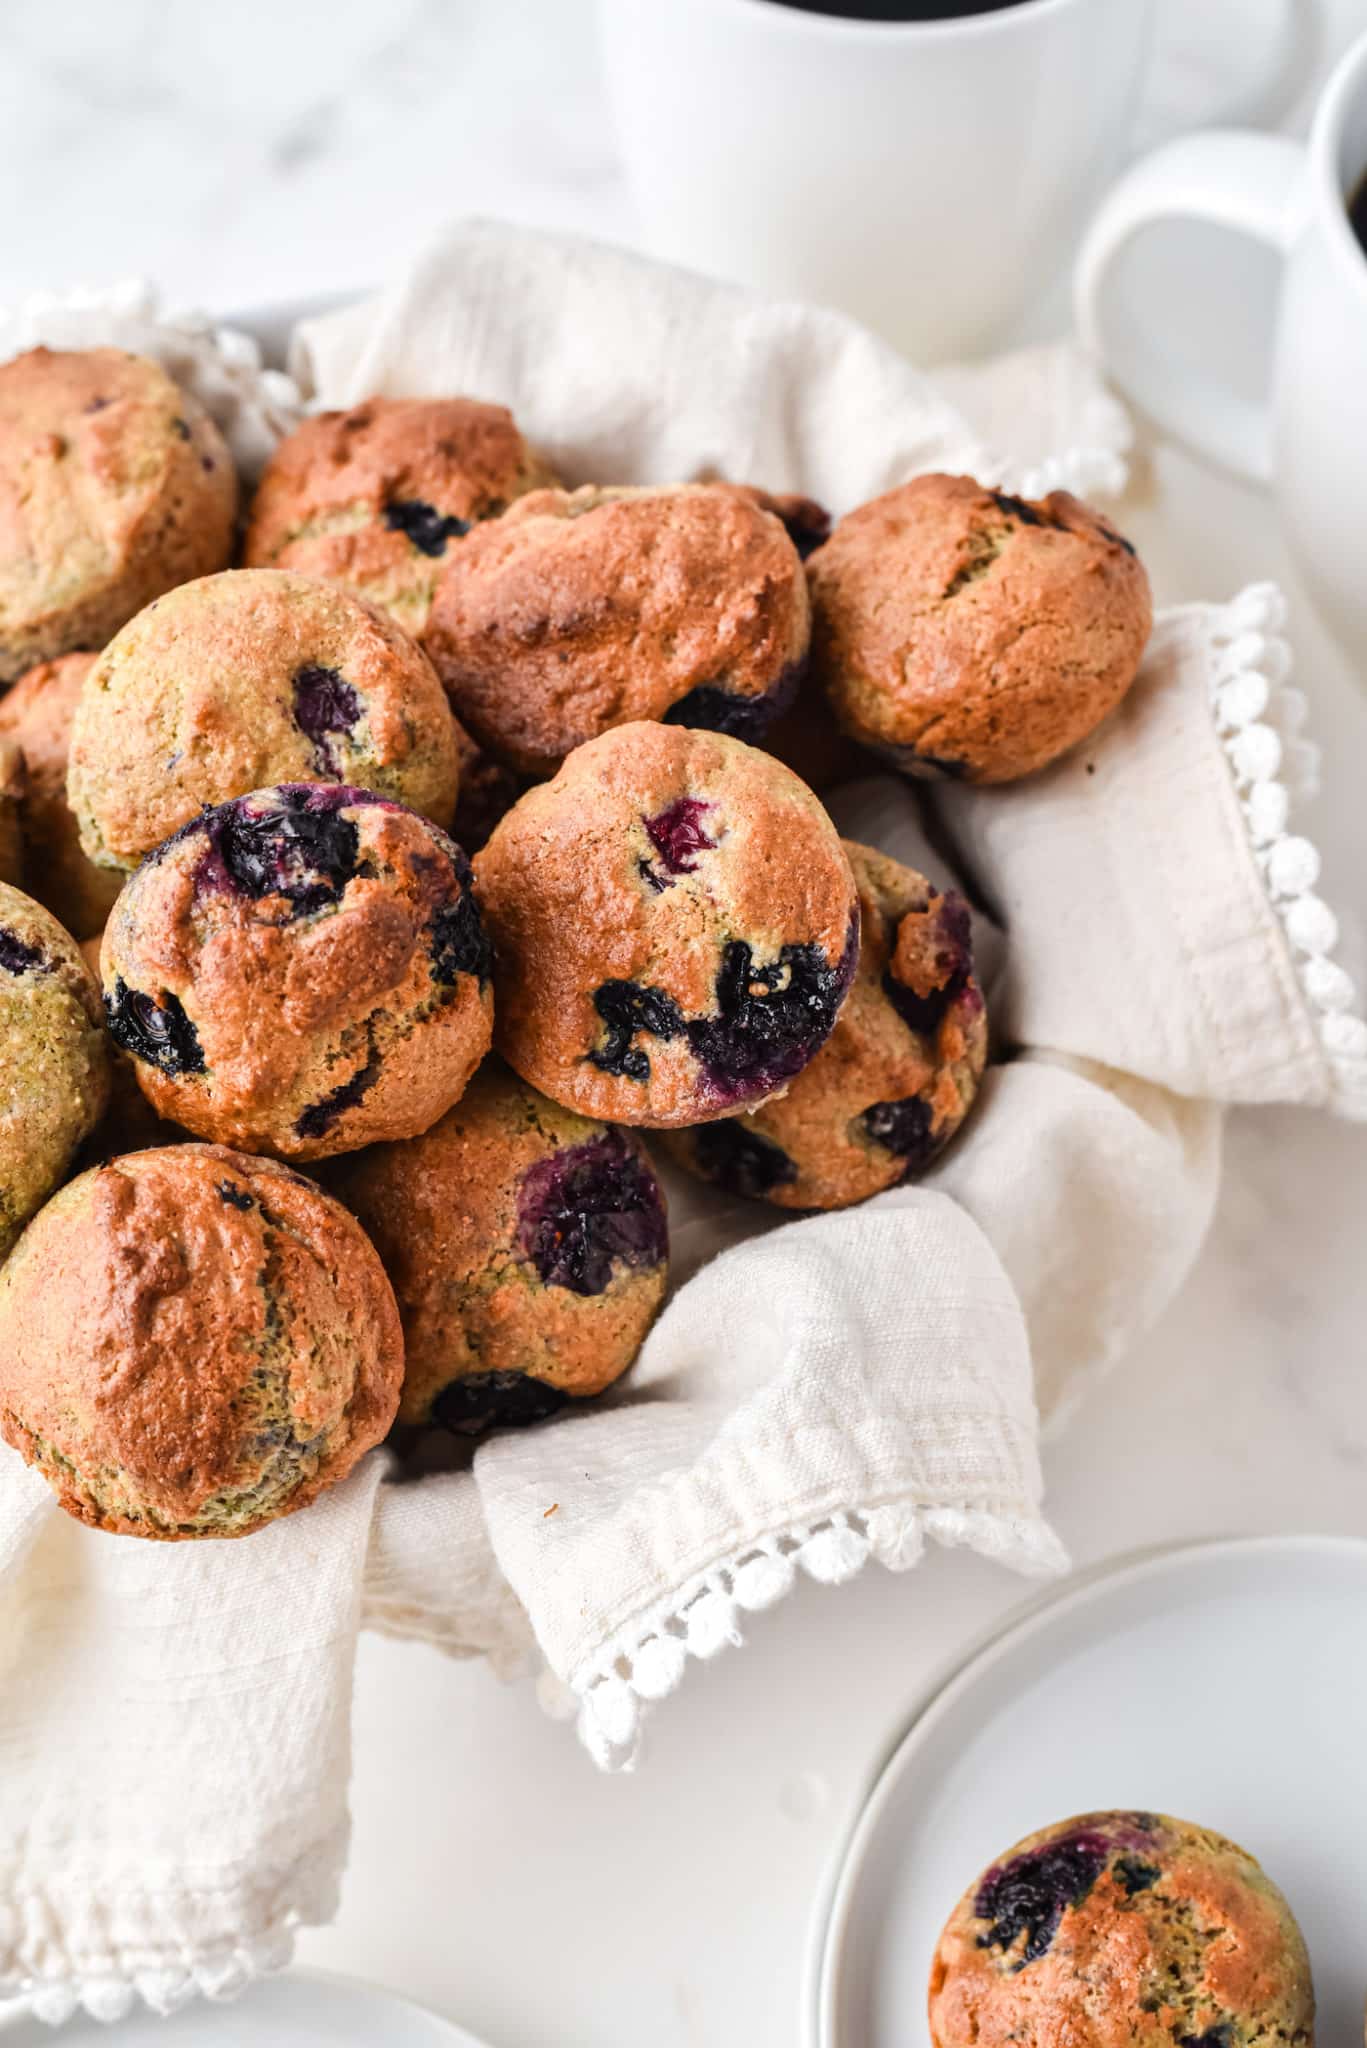 https://www.cleaneatingkitchen.com/wp-content/uploads/2022/03/air-fried-blueberry-muffins-hero-scaled.jpg